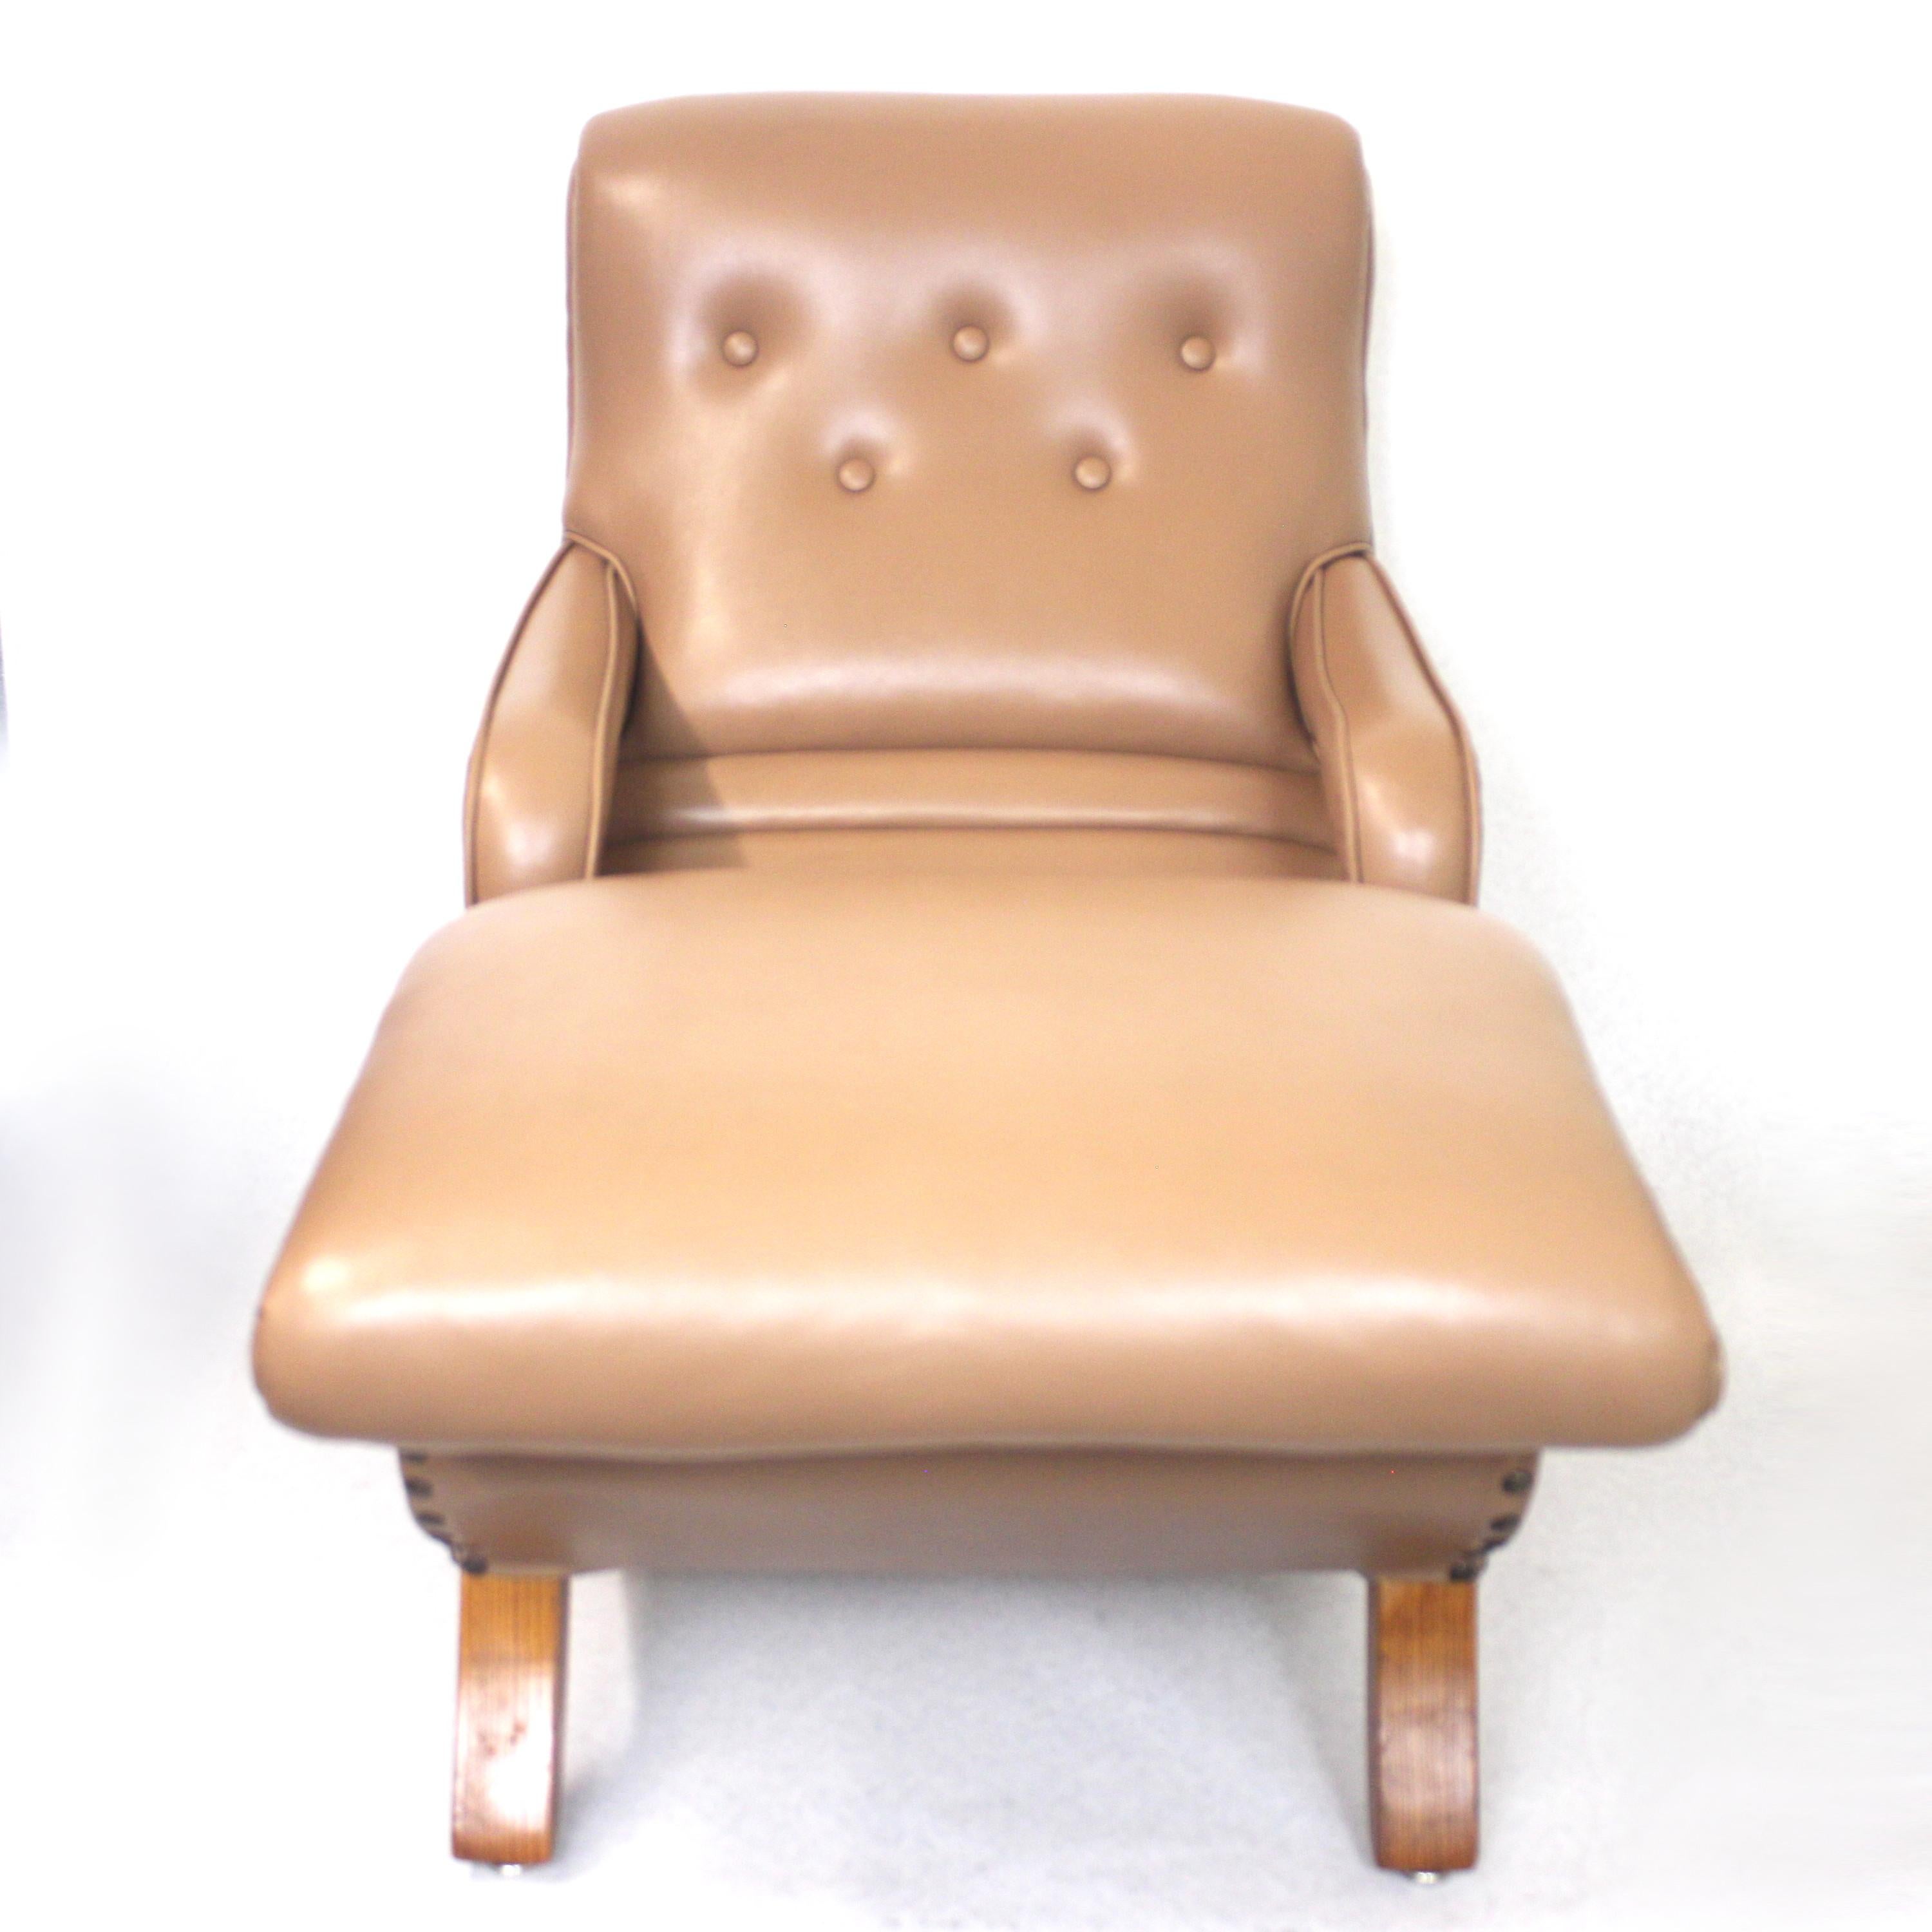 American Rare Mid-Century Modern Child Size Miniature 3/4 Scale Contour Lounge Chair no.  For Sale